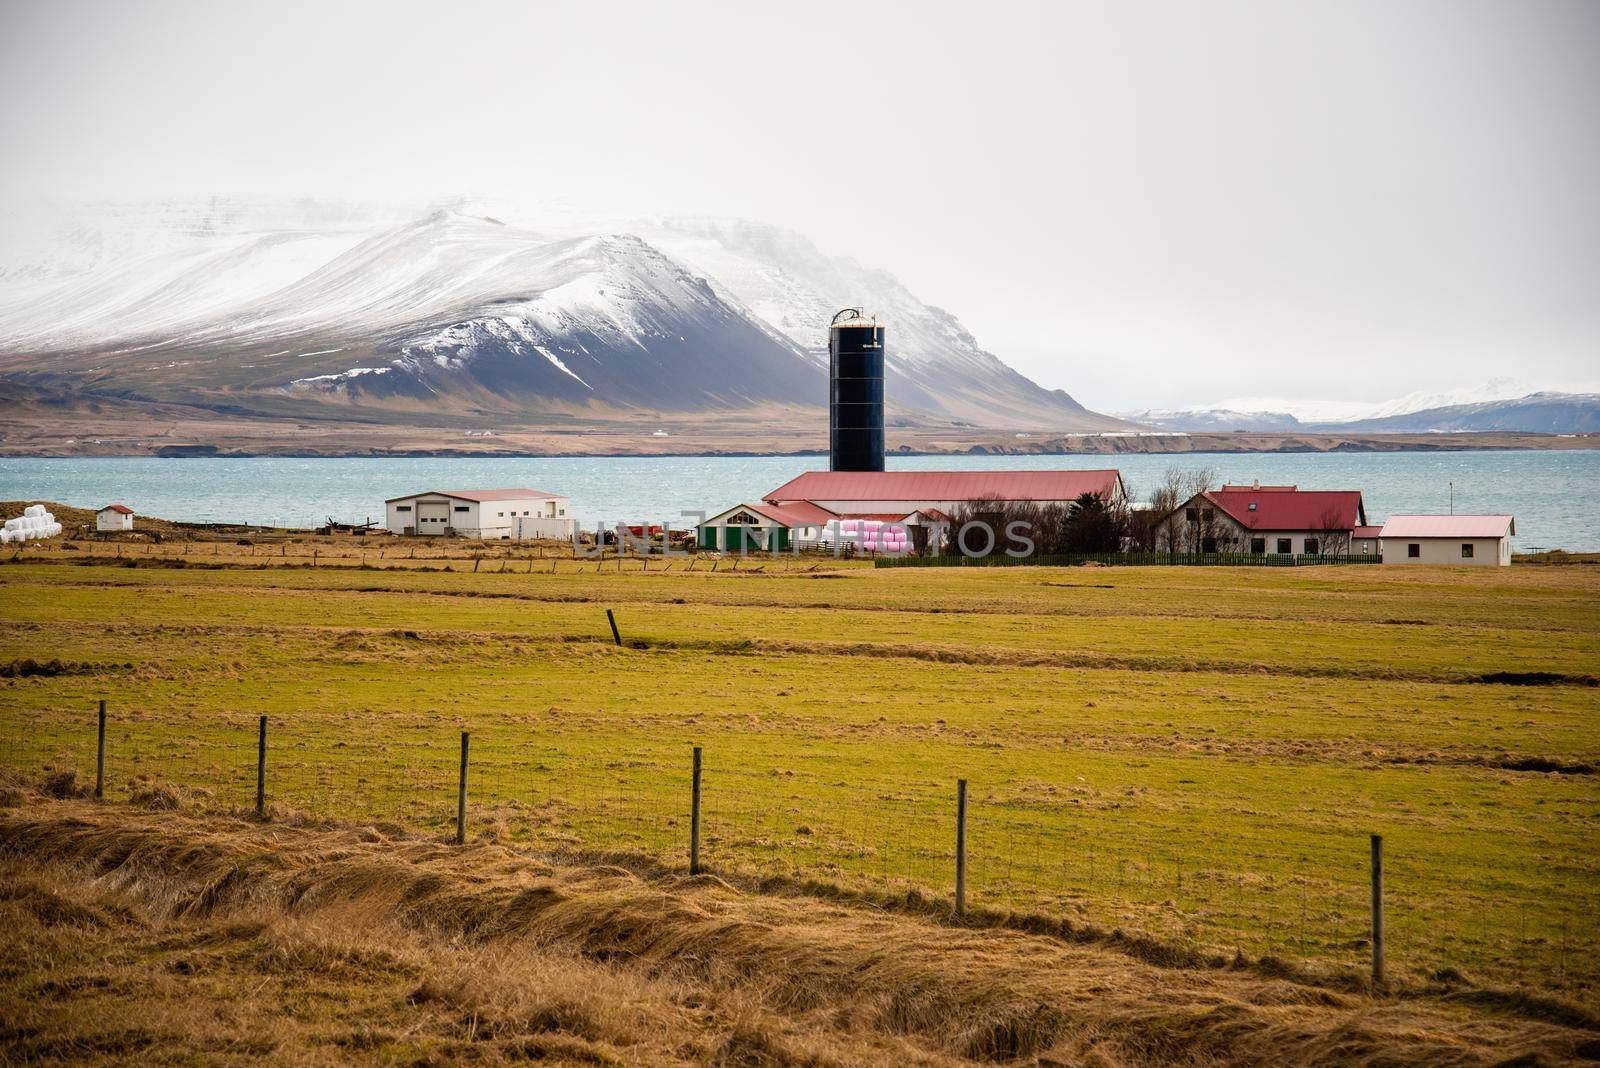 Vibrant grassy pasture leads into a gorgeous red barn with silo with magical snow capped mountains and blue water in the background of this Icelandic landscape by jyurinko